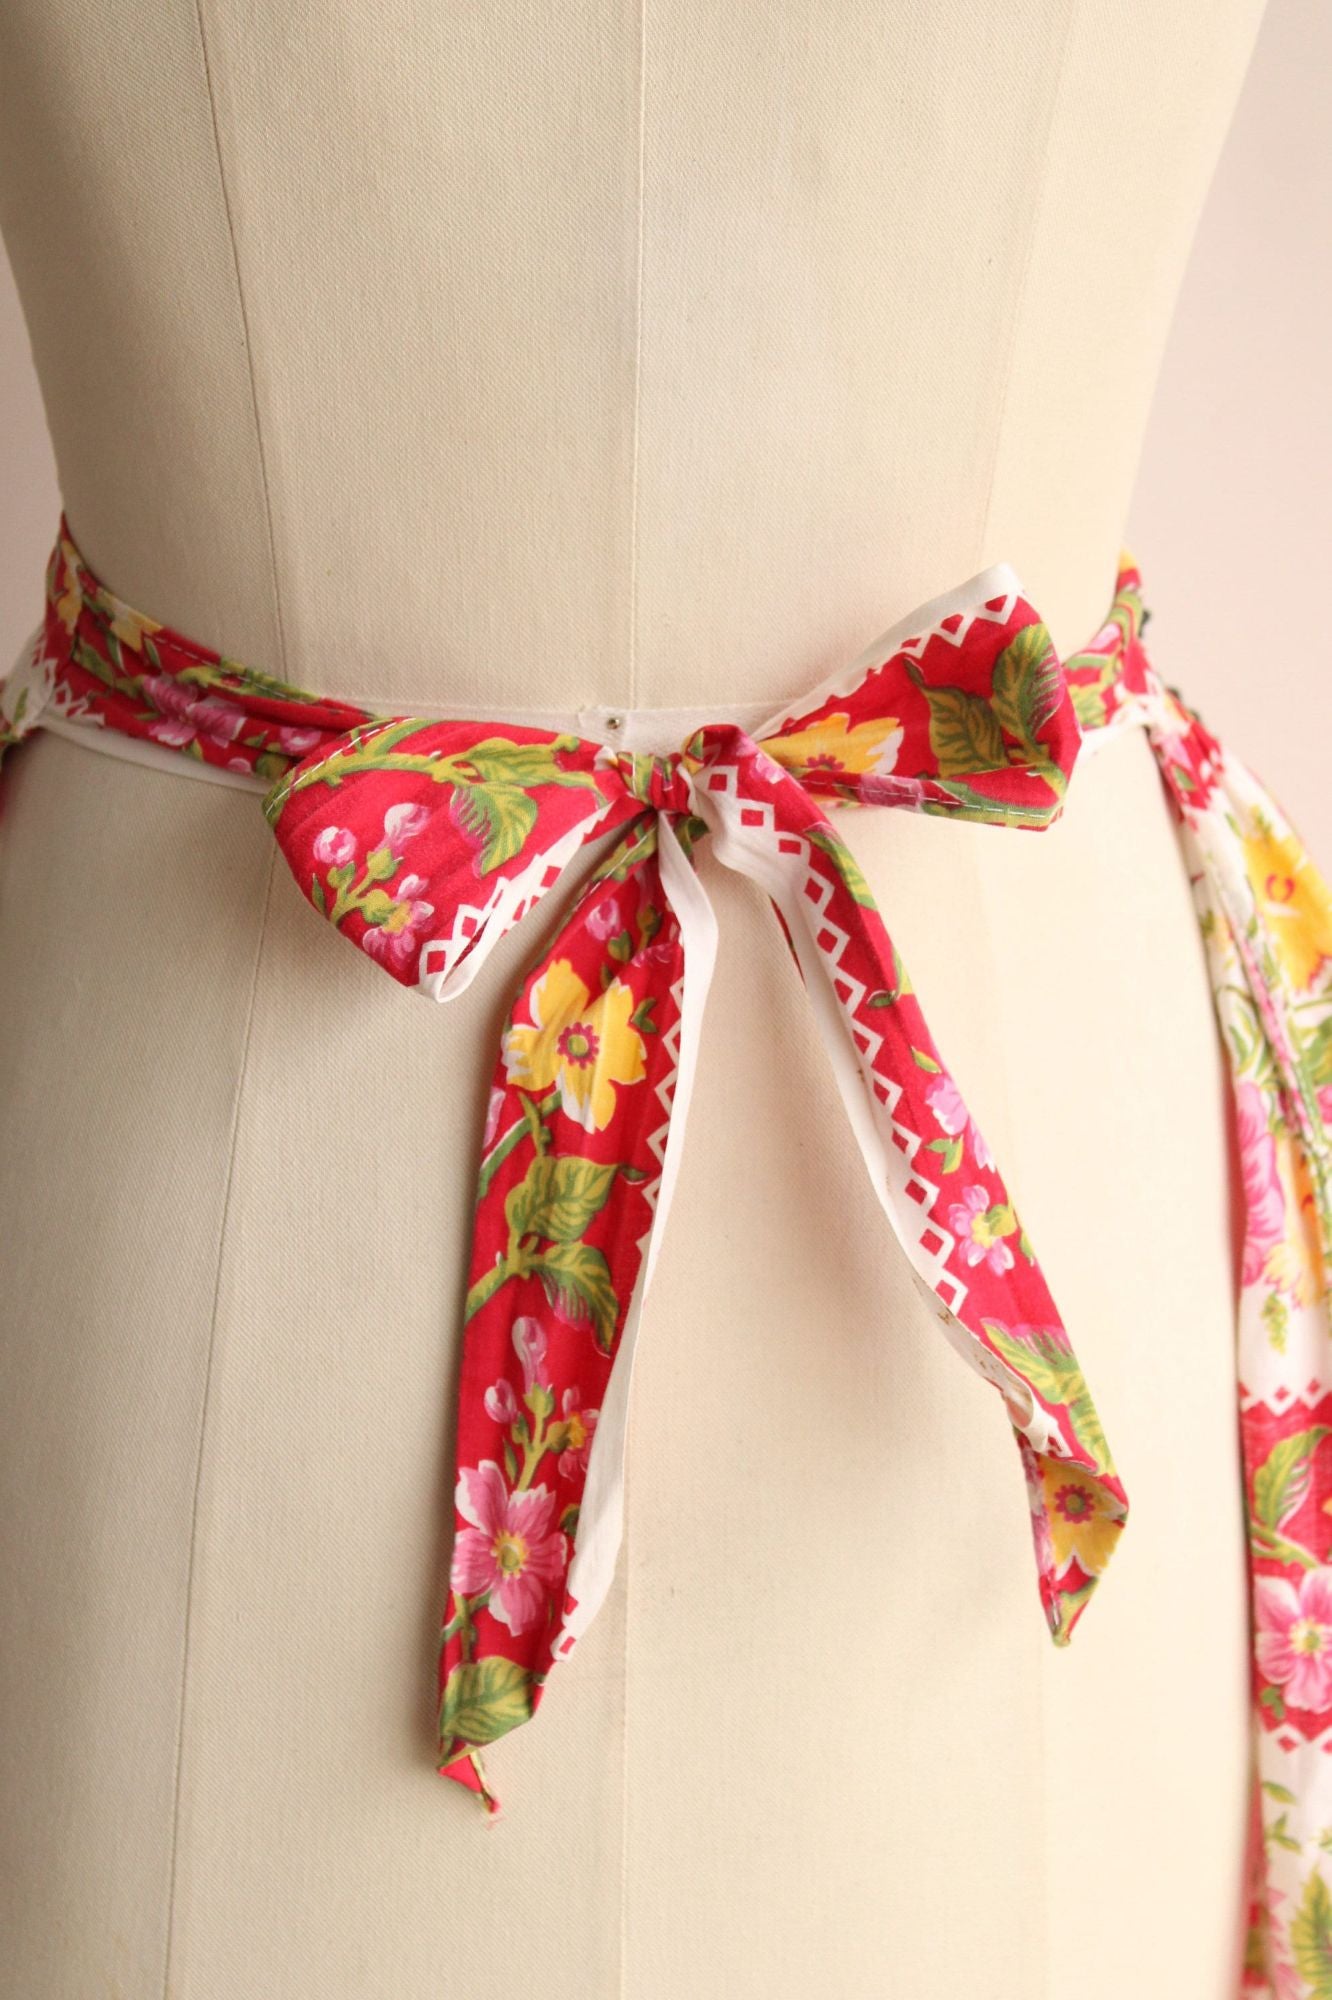 Vintage 1960s Pink and Yellow Rose Floral Print Cotton Half Apron with Pocket